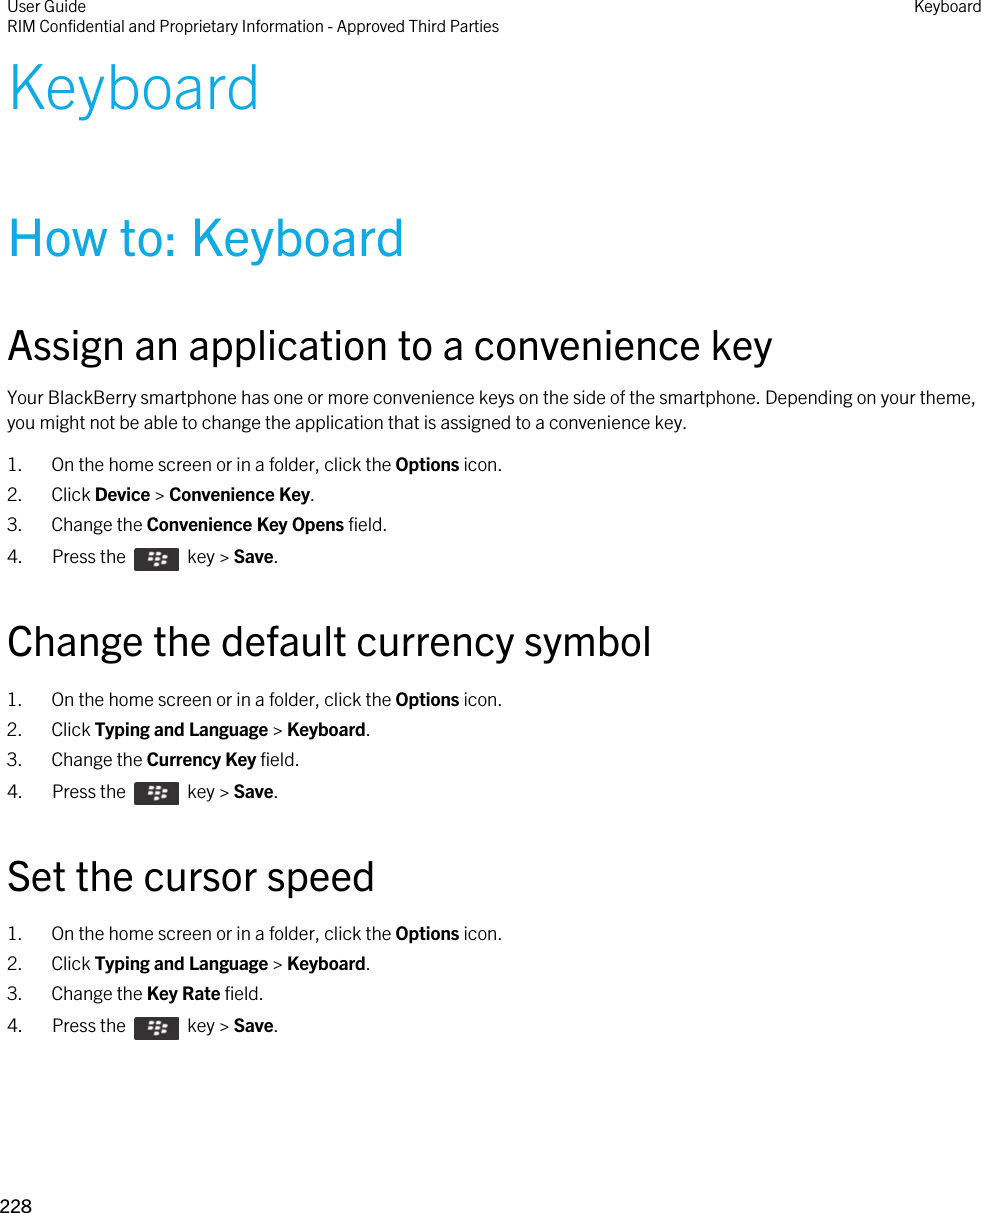 KeyboardHow to: KeyboardAssign an application to a convenience keyYour BlackBerry smartphone has one or more convenience keys on the side of the smartphone. Depending on your theme, you might not be able to change the application that is assigned to a convenience key.1. On the home screen or in a folder, click the Options icon.2. Click Device &gt; Convenience Key.3. Change the Convenience Key Opens field.4.  Press the    key &gt; Save. Change the default currency symbol1. On the home screen or in a folder, click the Options icon.2. Click Typing and Language &gt; Keyboard.3. Change the Currency Key field.4.  Press the    key &gt; Save. Set the cursor speed1. On the home screen or in a folder, click the Options icon.2. Click Typing and Language &gt; Keyboard.3. Change the Key Rate field.4.  Press the    key &gt; Save. User GuideRIM Confidential and Proprietary Information - Approved Third Parties Keyboard228 